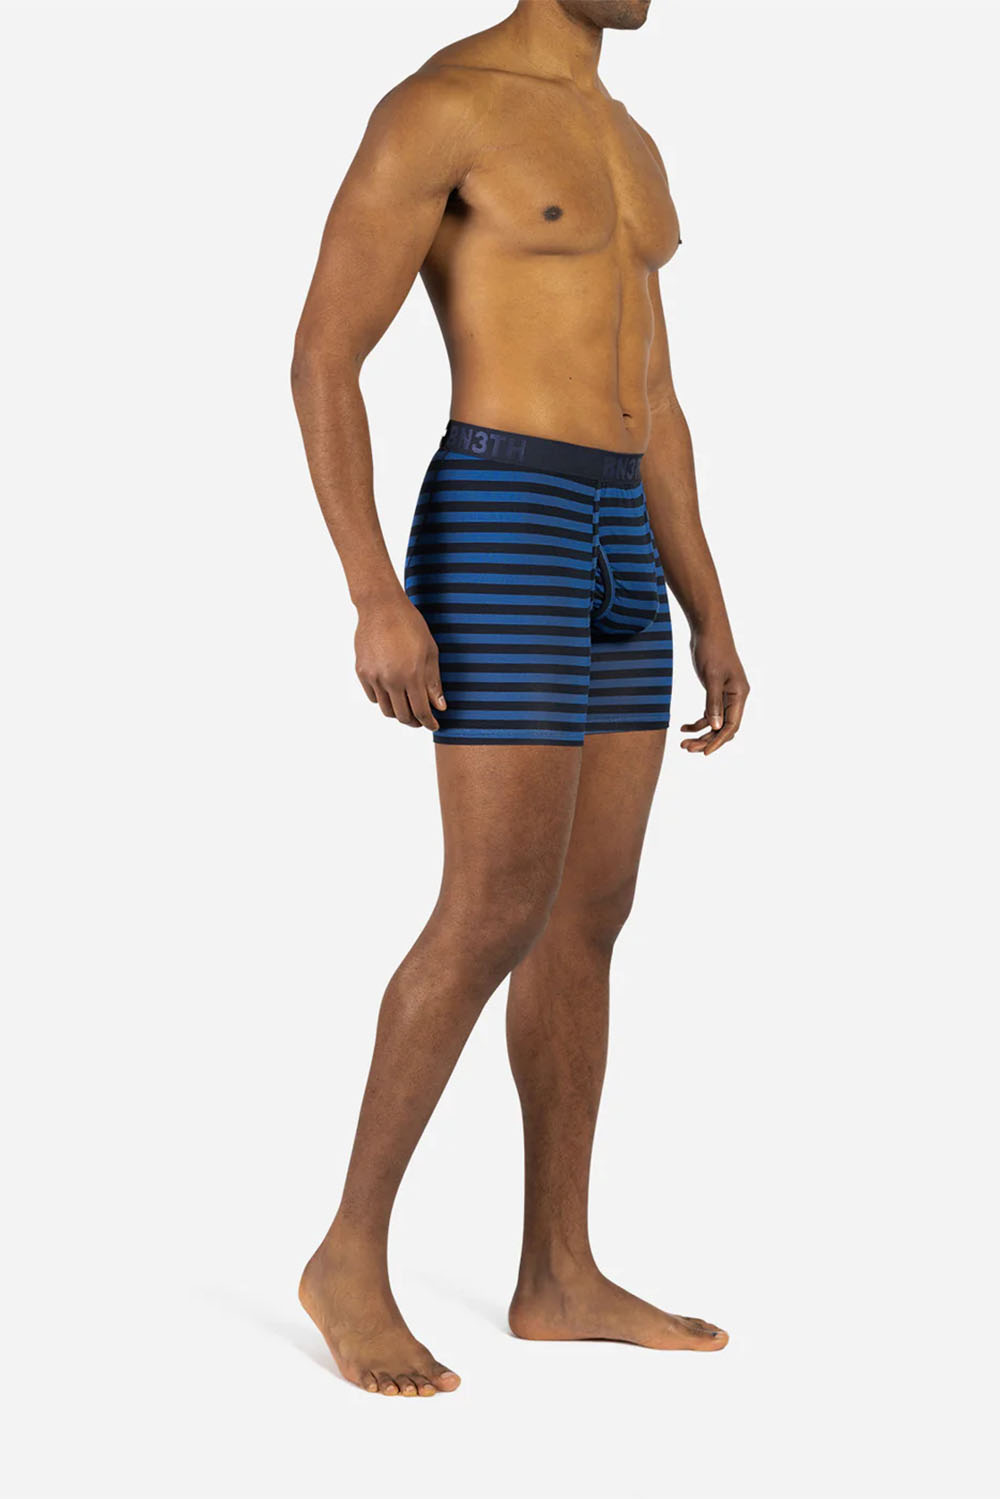 BN3TH - Classic Boxer Brief with Fly - Traditional Stripe Quartz - Model